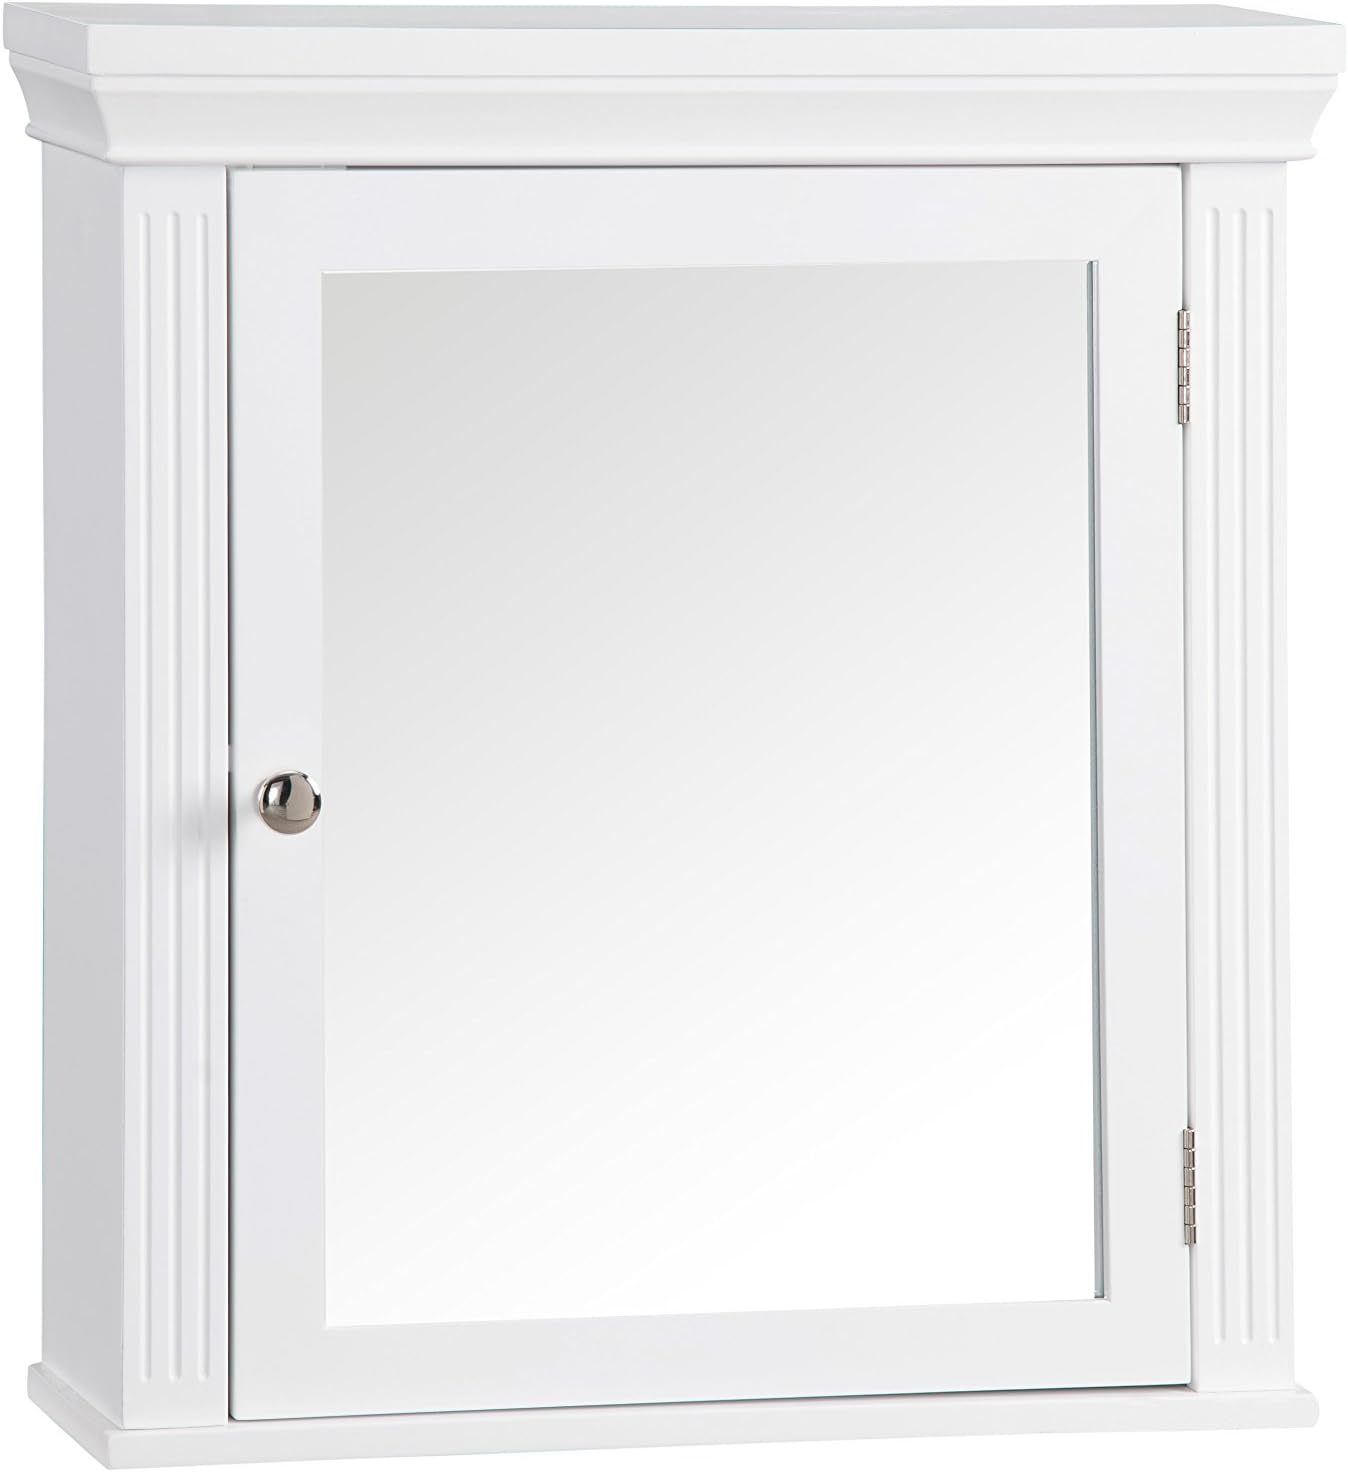 The Detachable Chestnut Medicine Wall Cabinet From Elegant Home Fashions In - $86.98